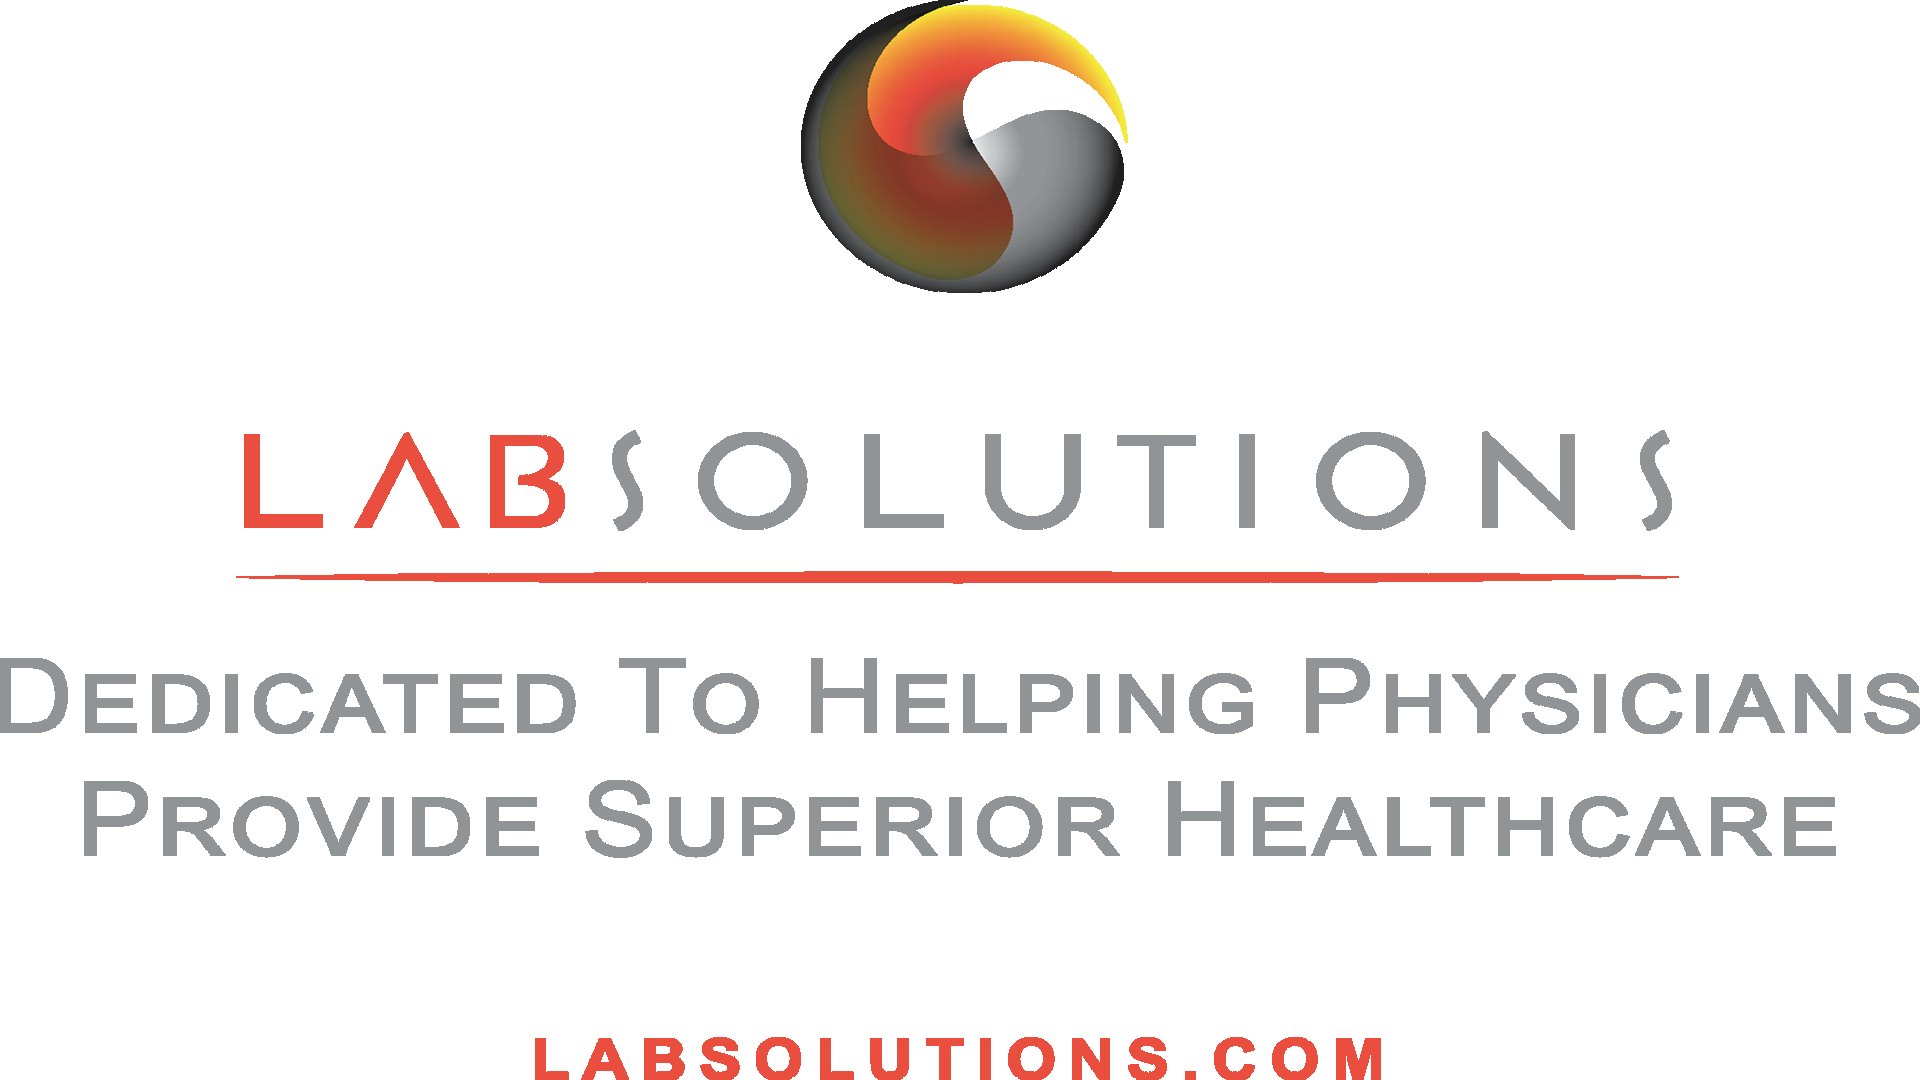  LABSOLUTIONS DEDICATED TO HELPING PHYSICIANS PROVIDE SUPERIOR HEALTHCARE LABSOLUTIONS.COM